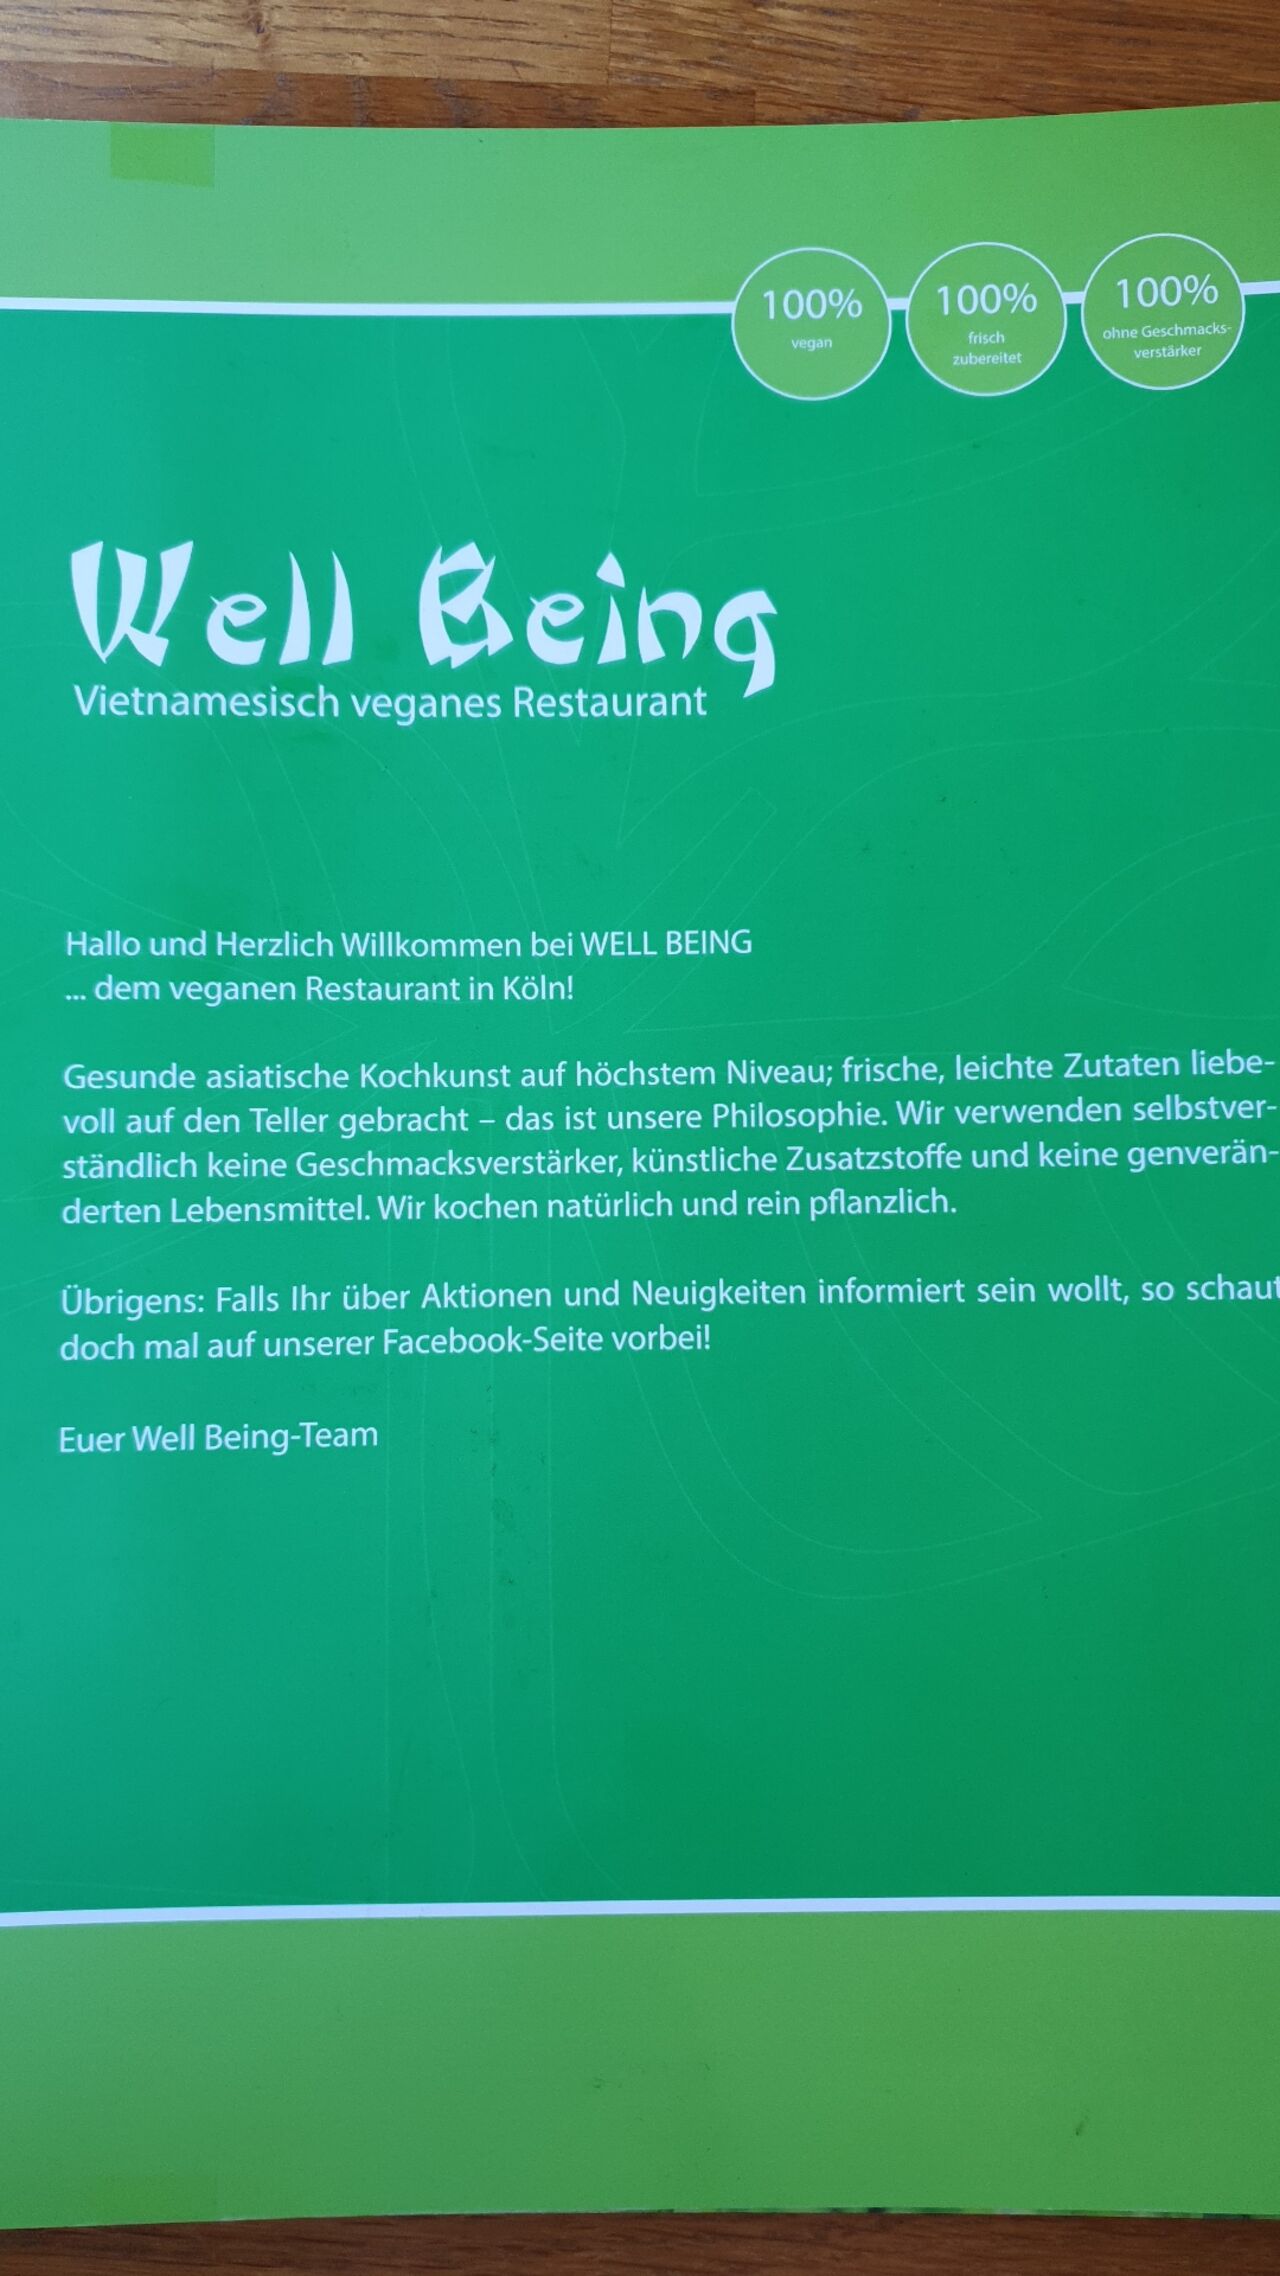 A photo of Well Being 2